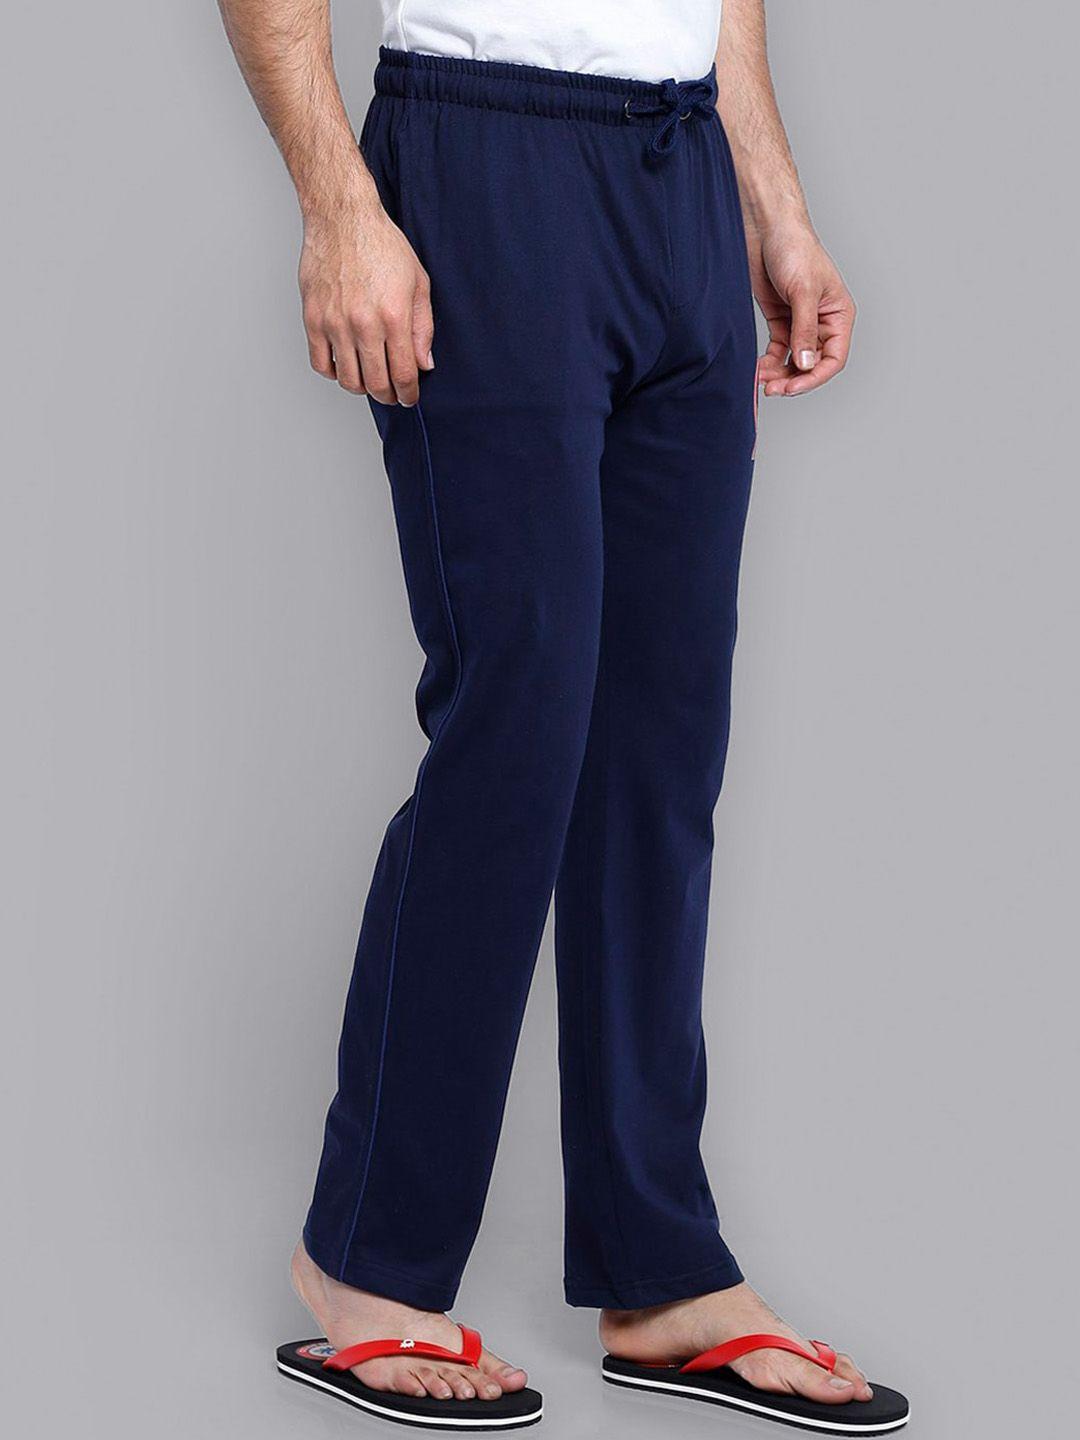 free authority men navy blue avengers featured lounge pants